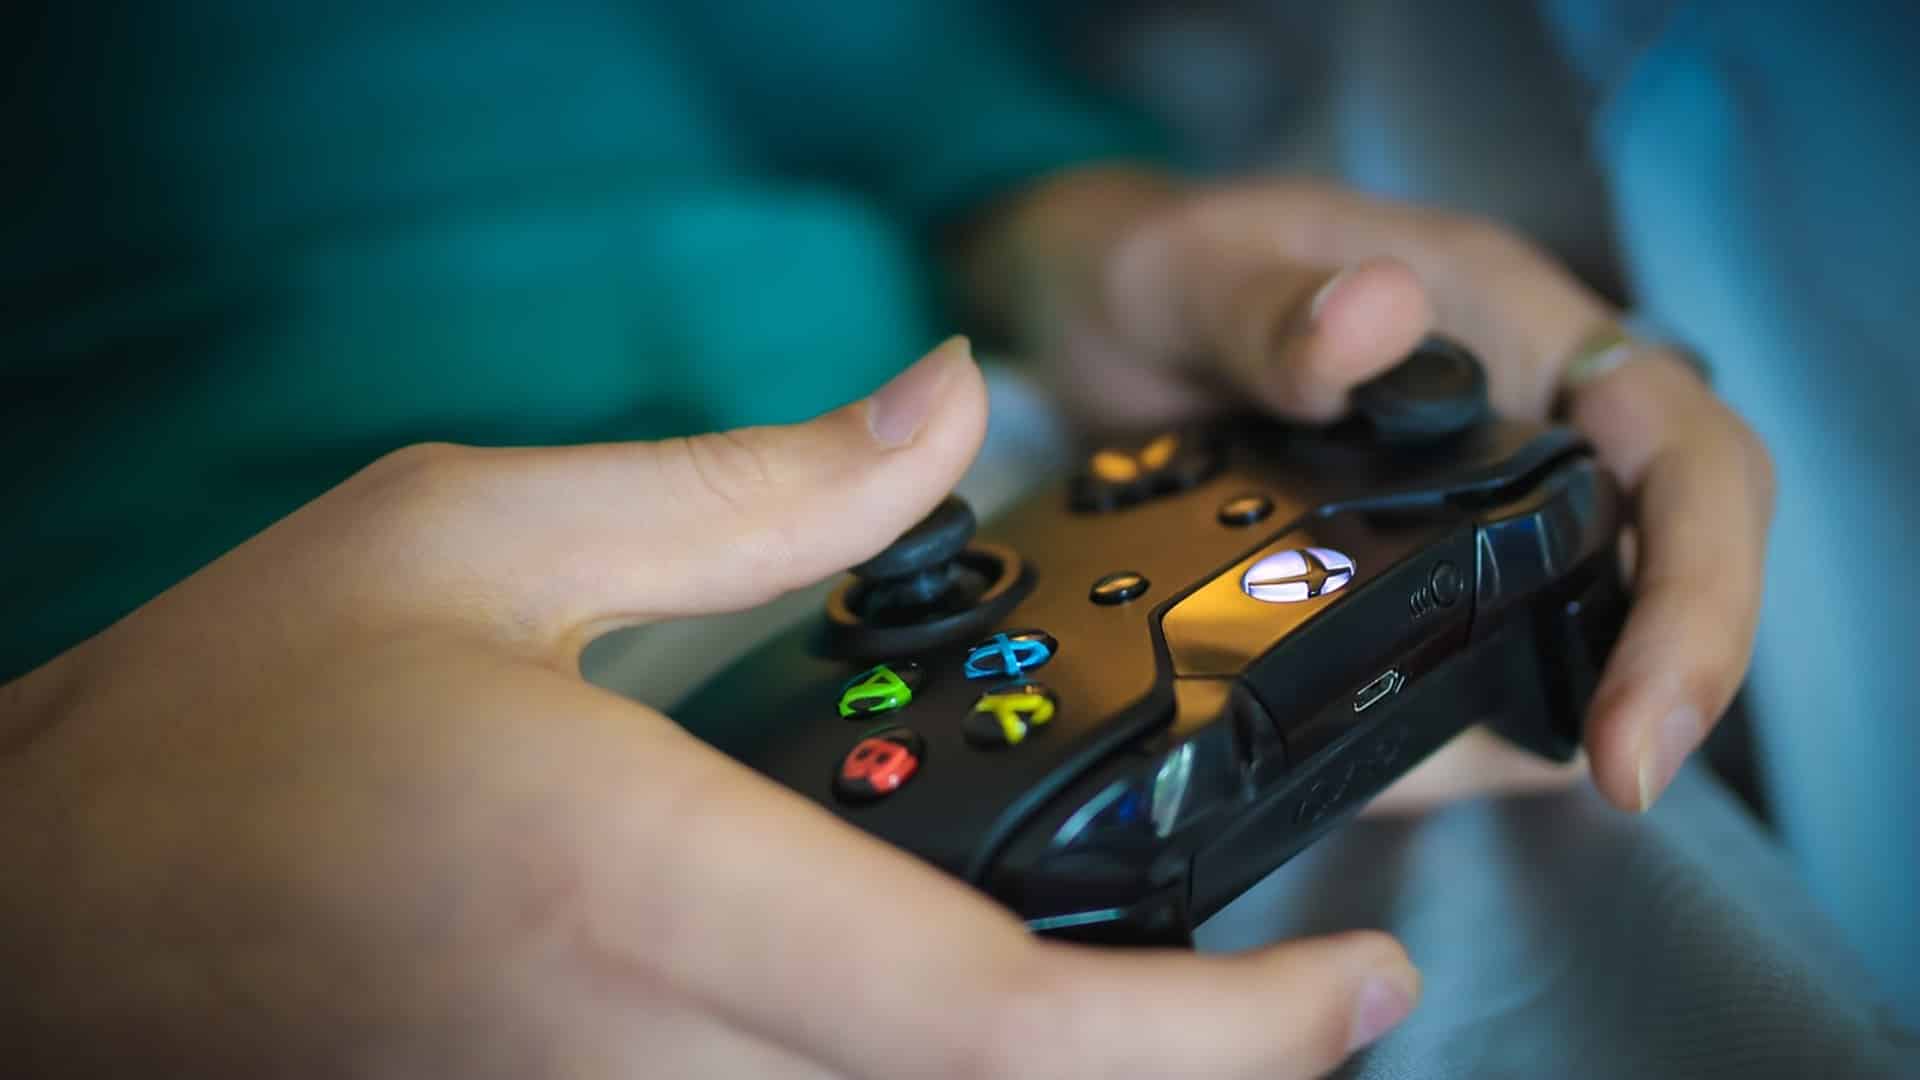 Microsoft has stopped making Xbox One consoles